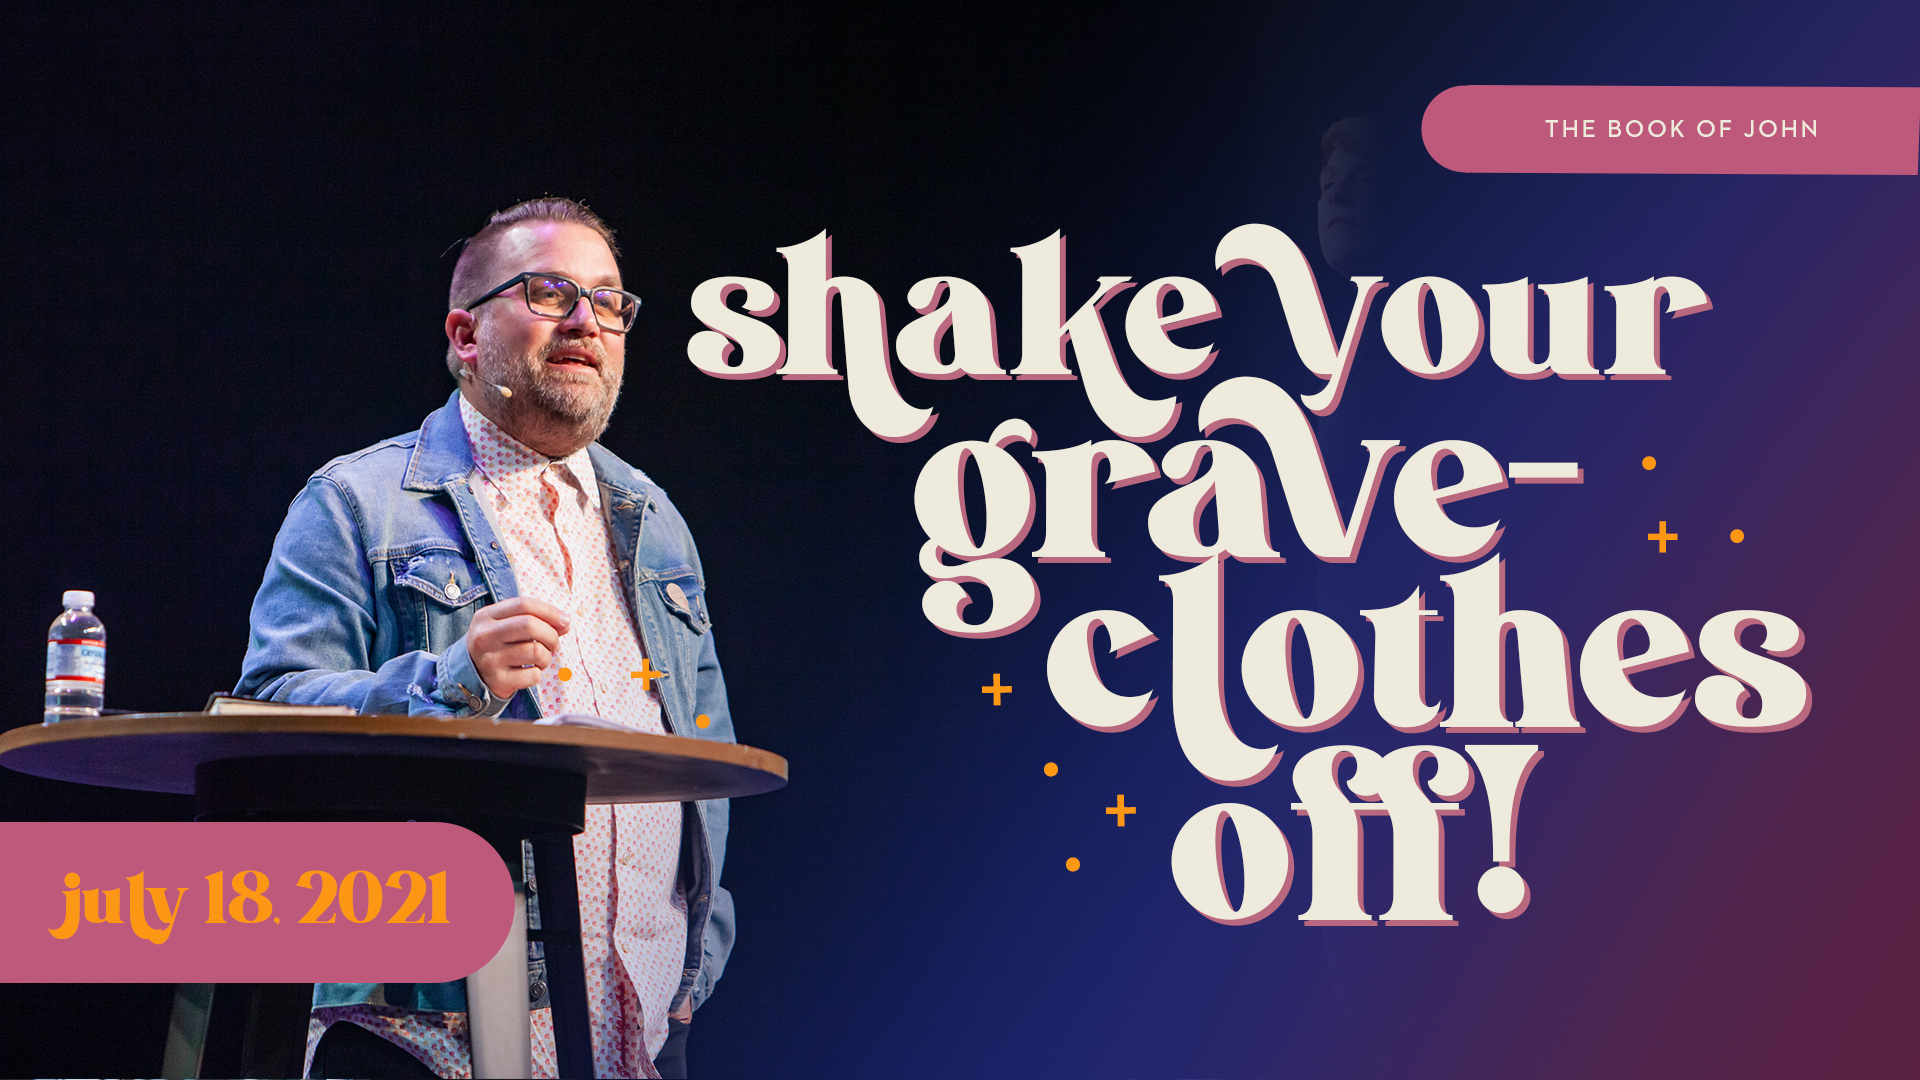 Shake Your Graveclothes off - Death to Life Image